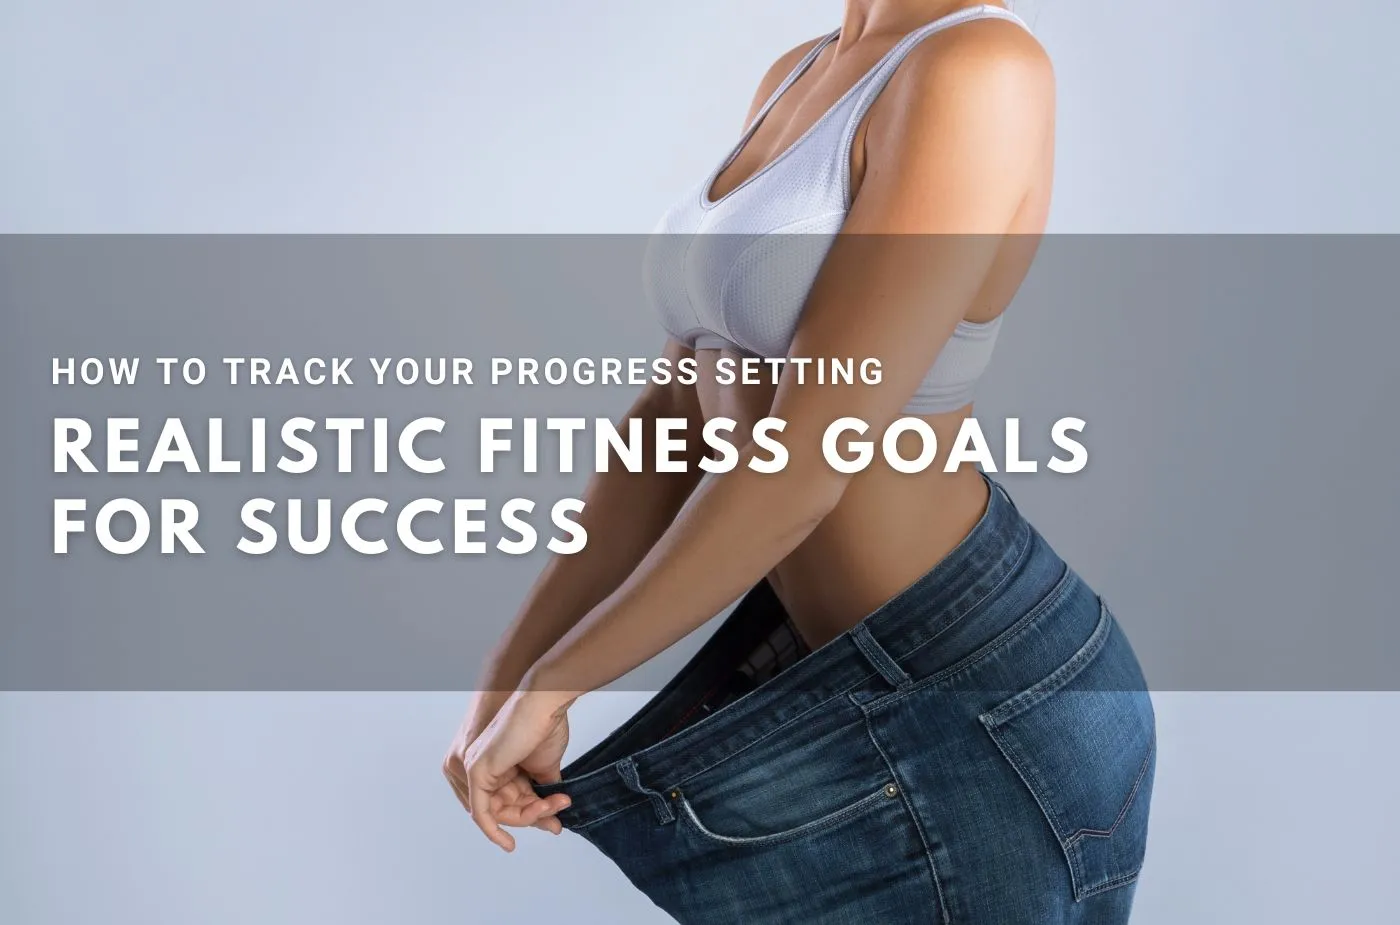 How to Track Your Progress: Setting Realistic Fitness Goals for Success